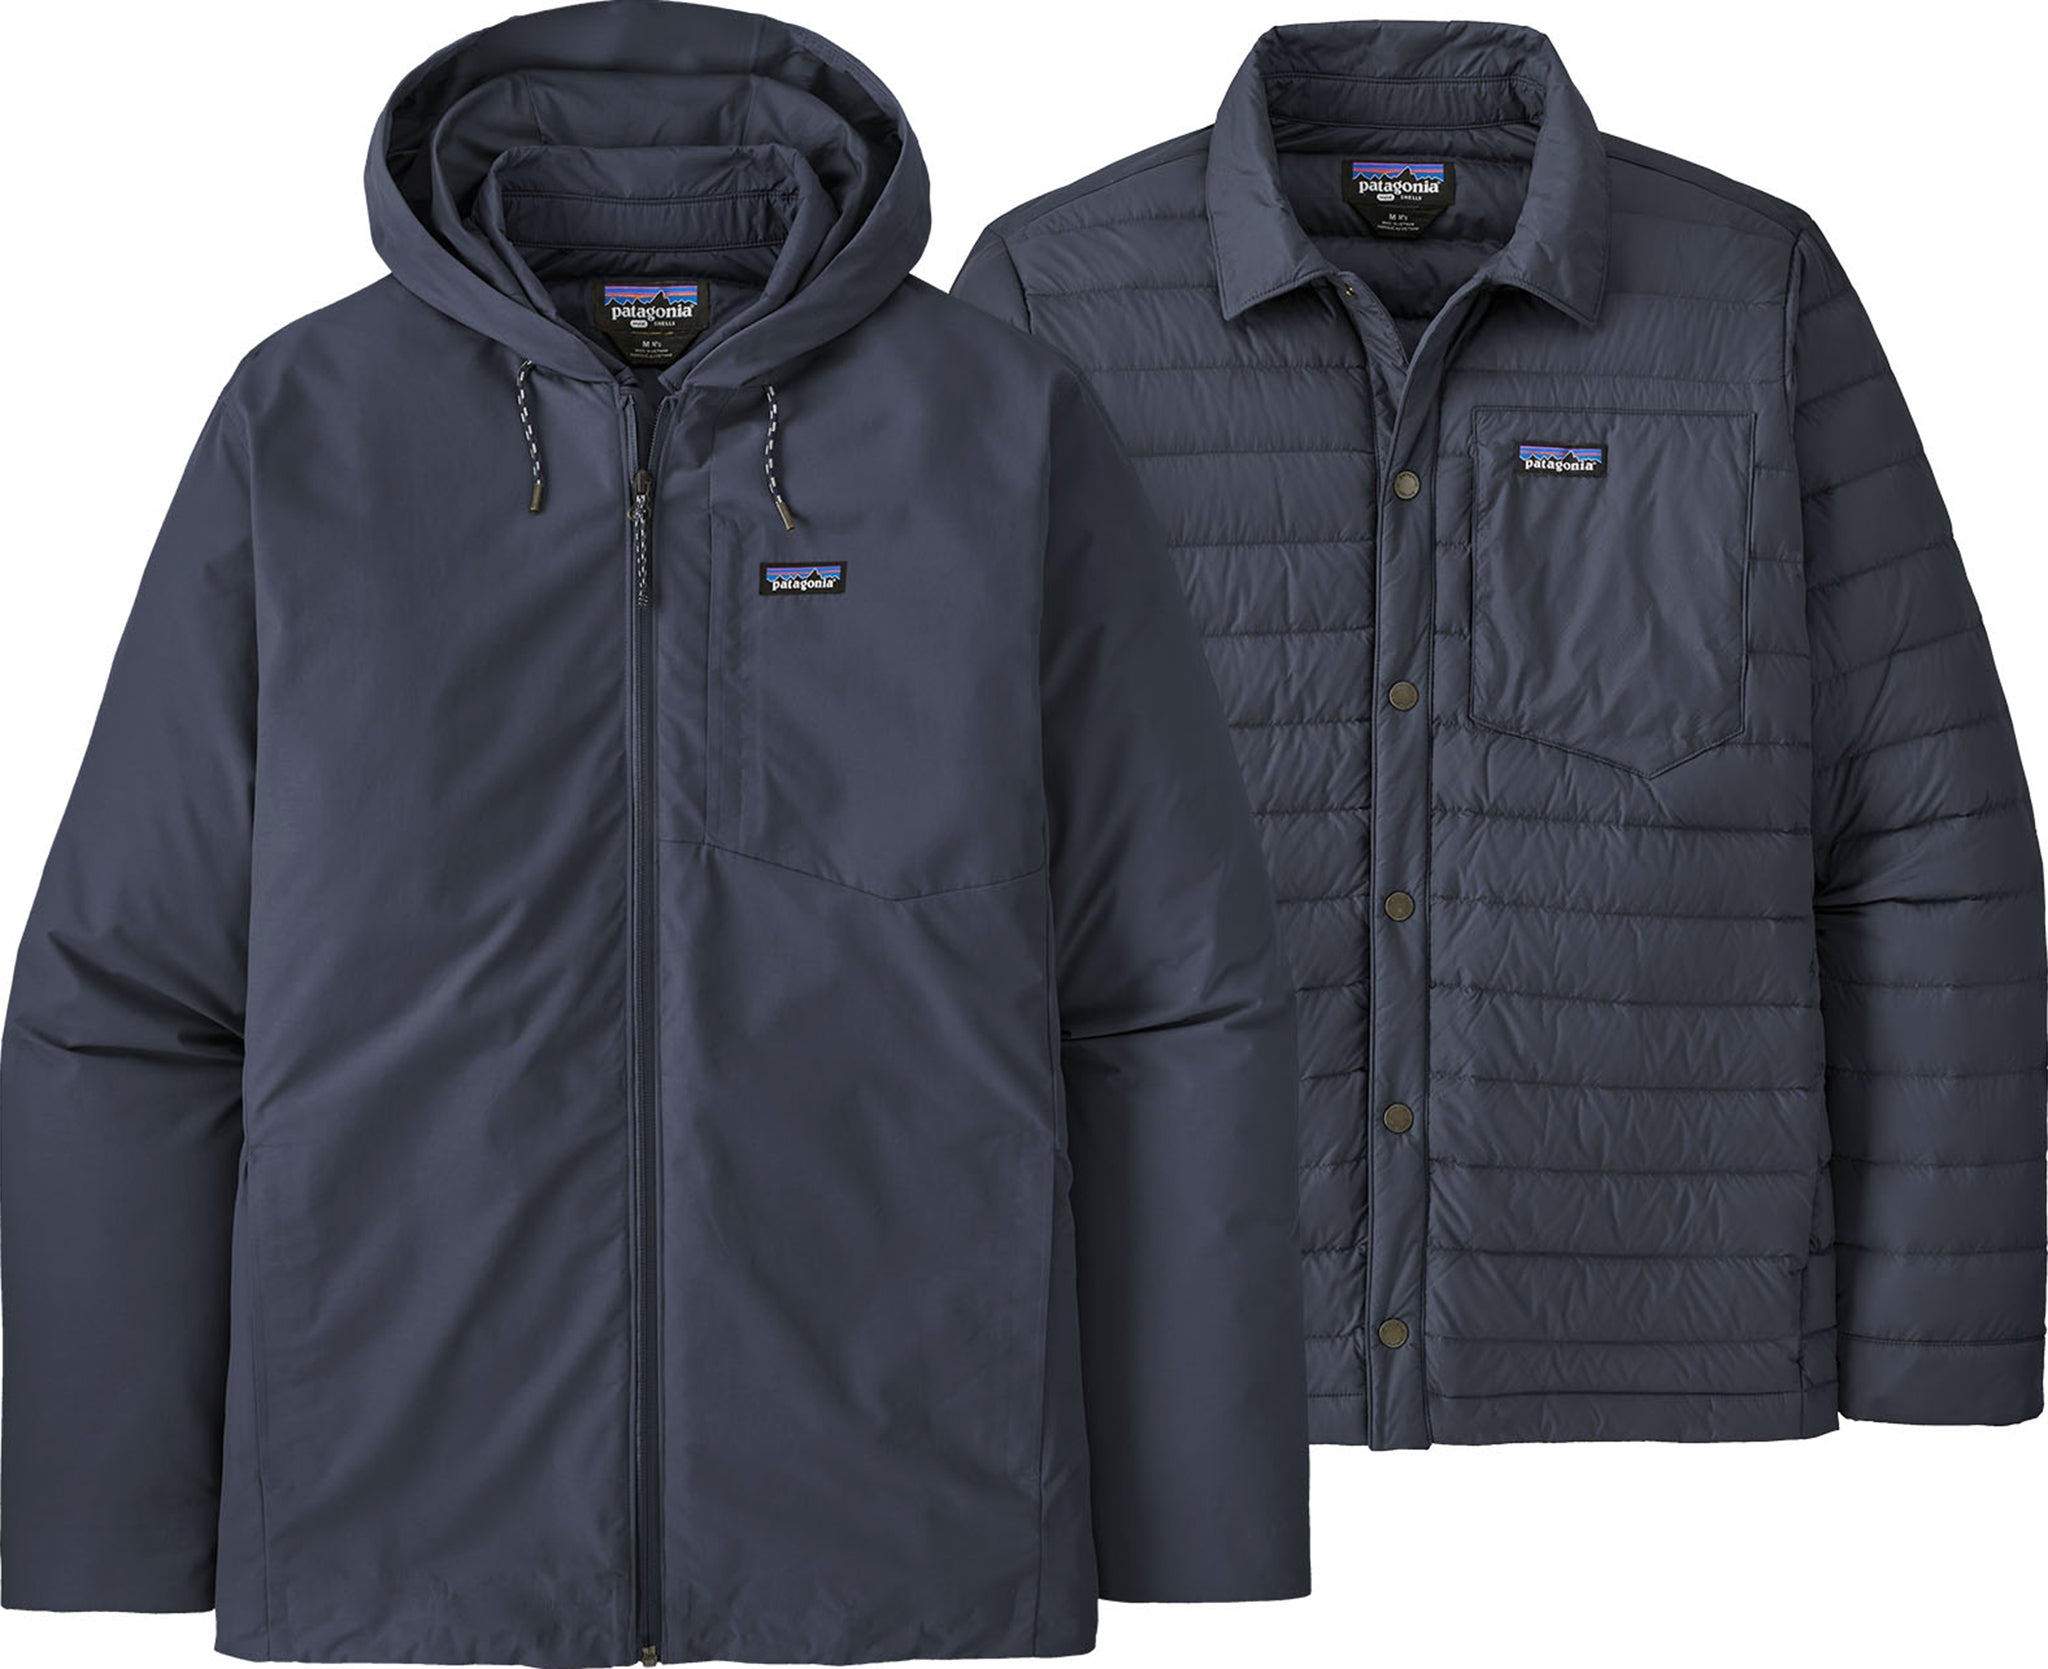 Buy Patagonia Downdrift Jacket from £147.90 (Today) – Best Deals on